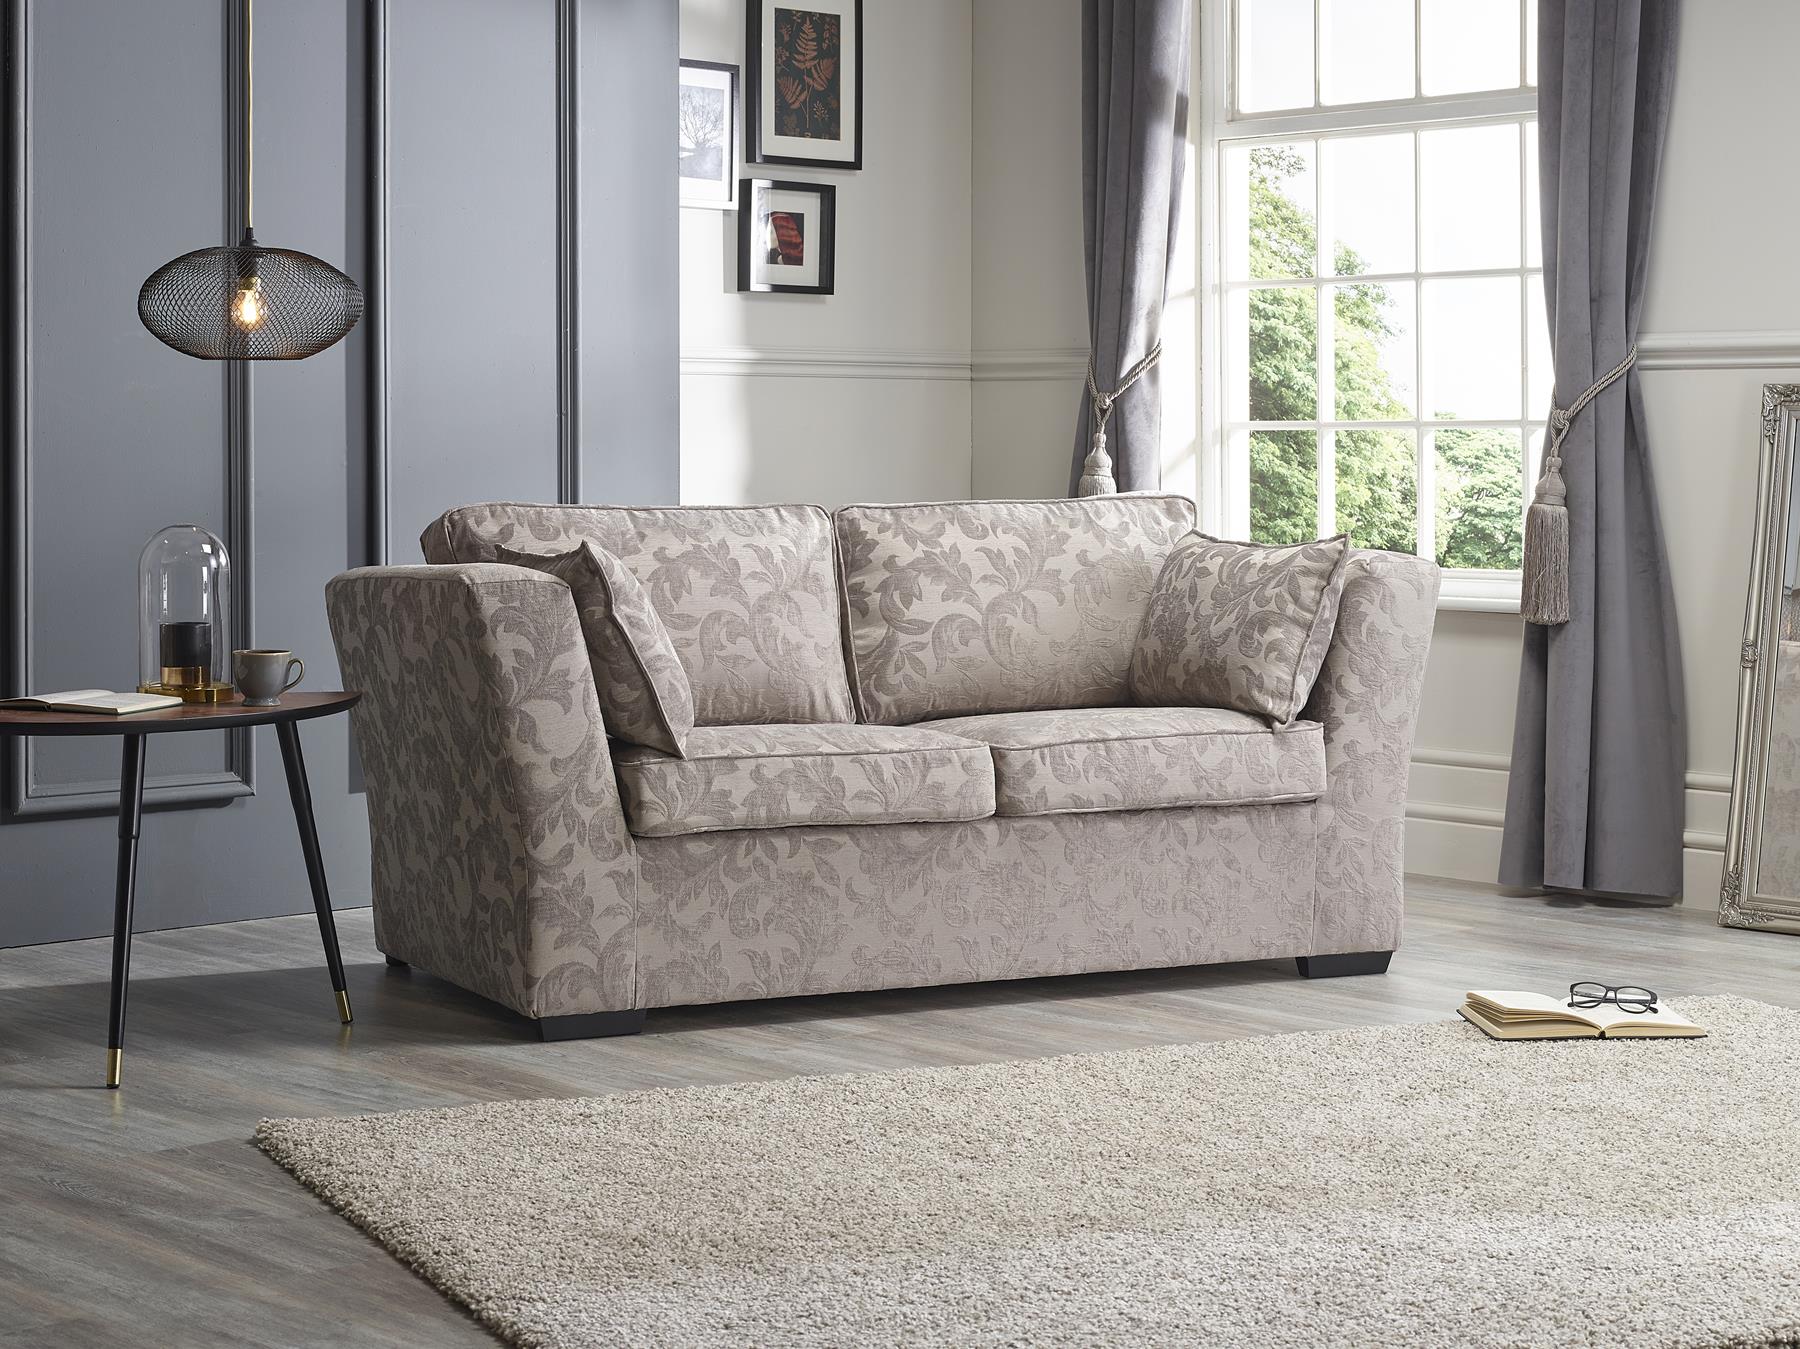 Sofabed.co.uk